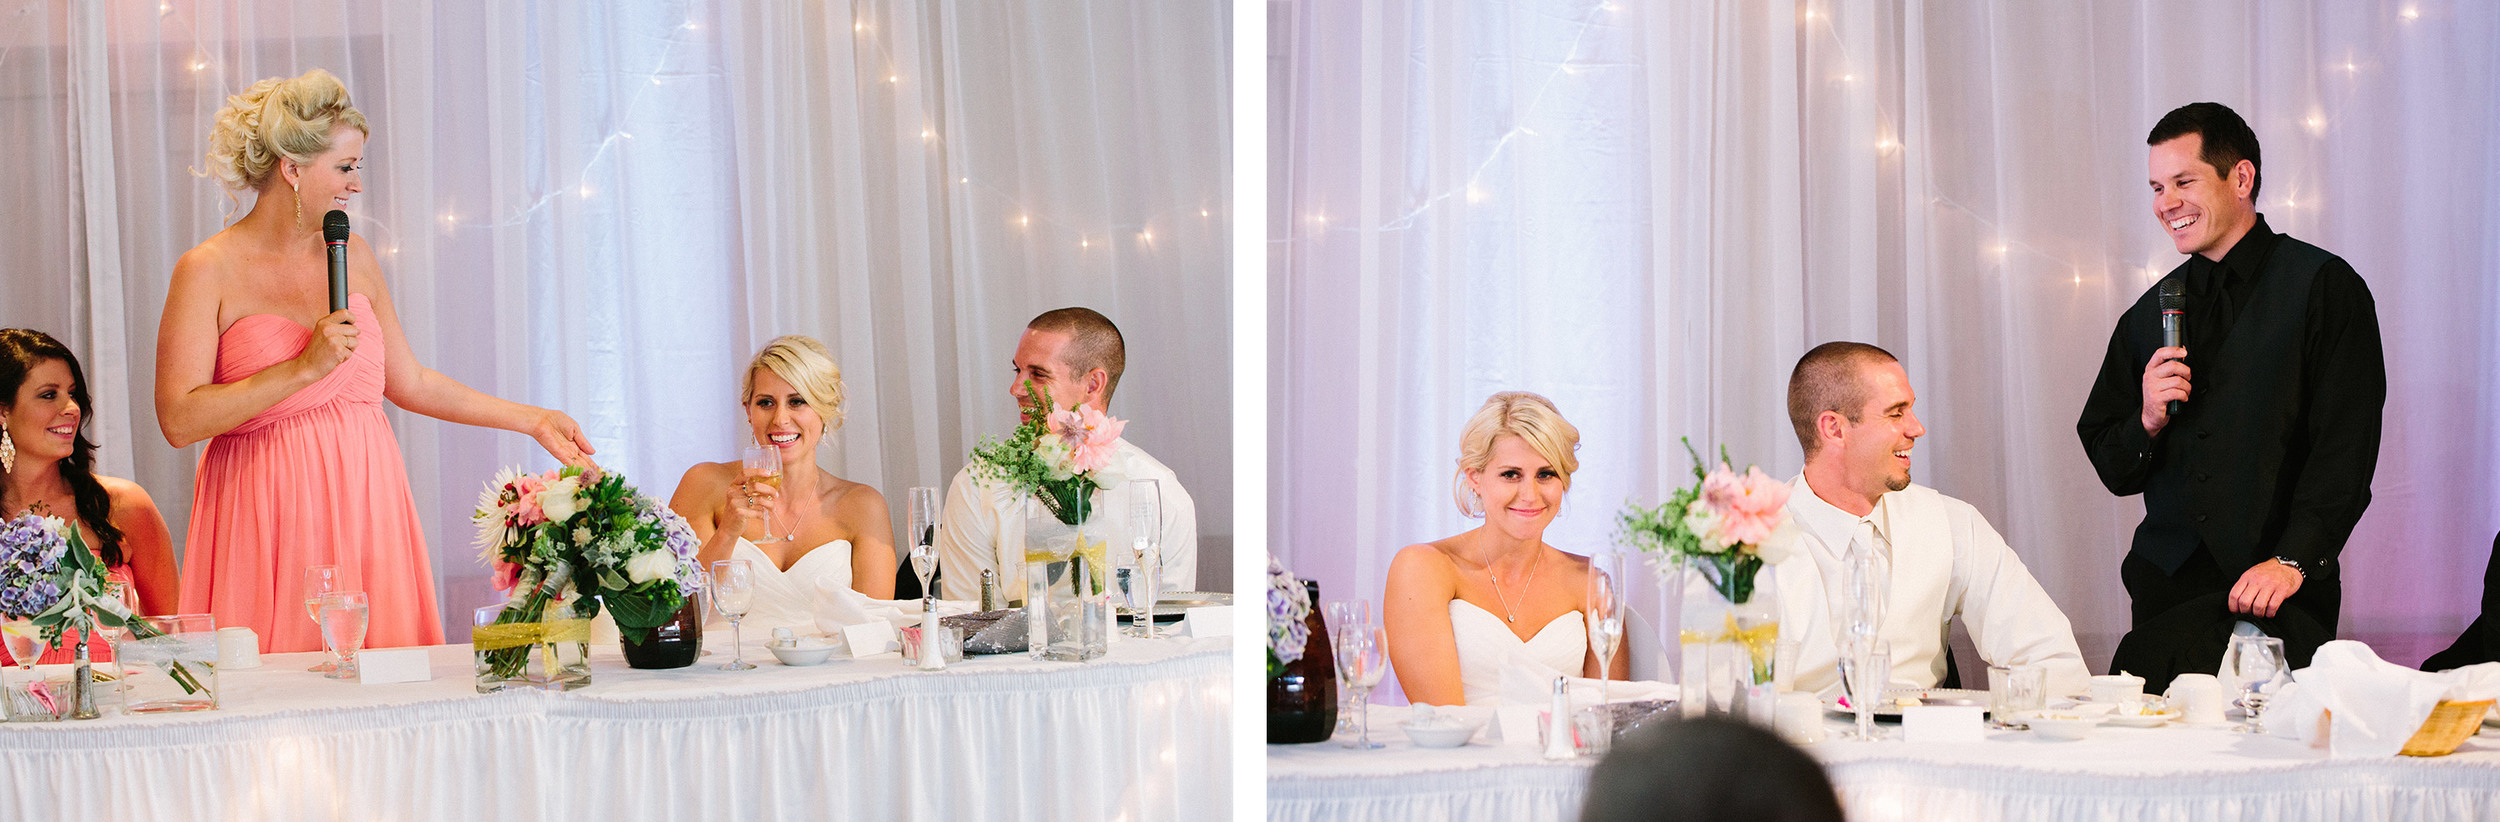 Breezy Point's Antler's Pavilion Wedding and White Birch Room Reception